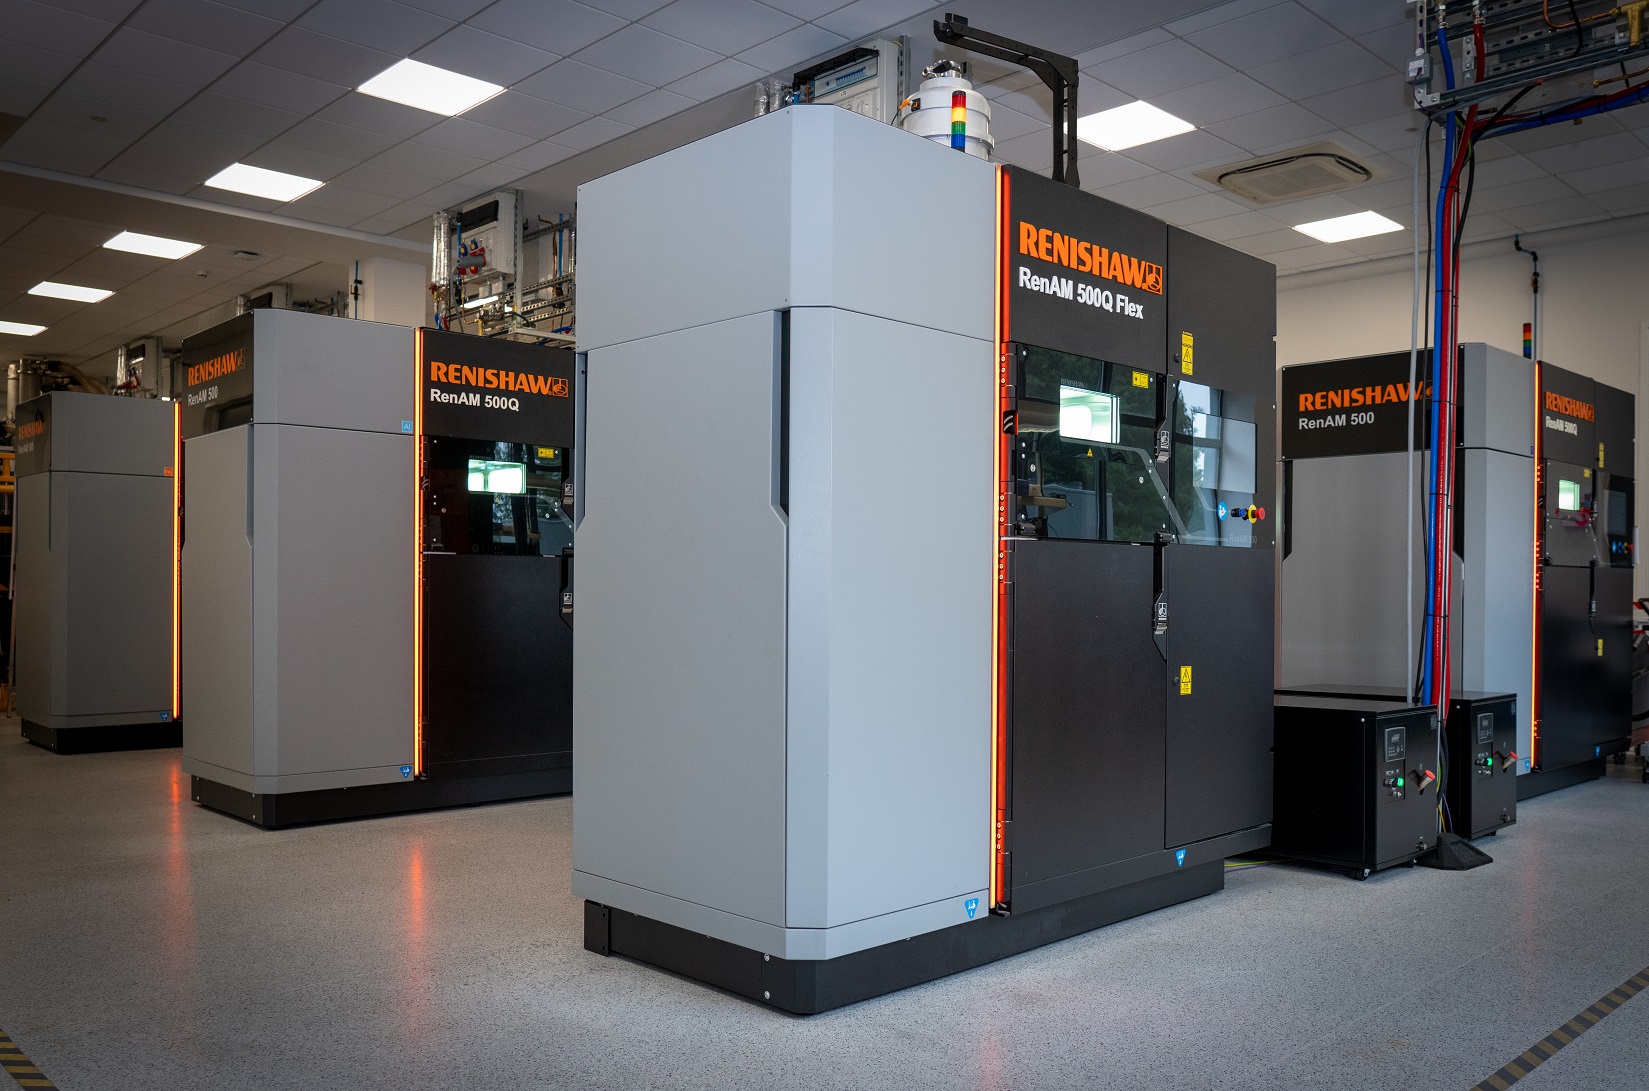 Renishaw has launched a new range of 3D printing machinery.